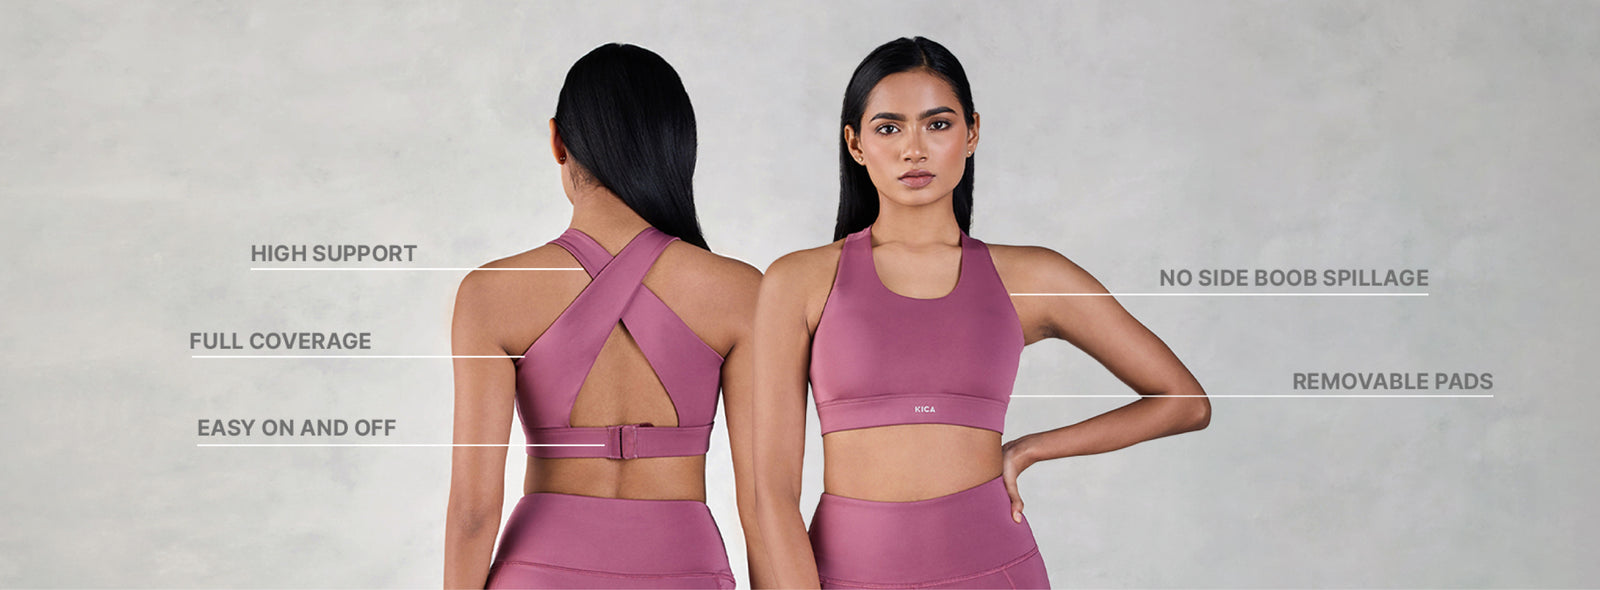 Bodychum 2 Pcs Zipper Sports Bra for Women Adjustable Straps Quick Dry  Extra Support Coverage Criss-Cross Padded Bra Running